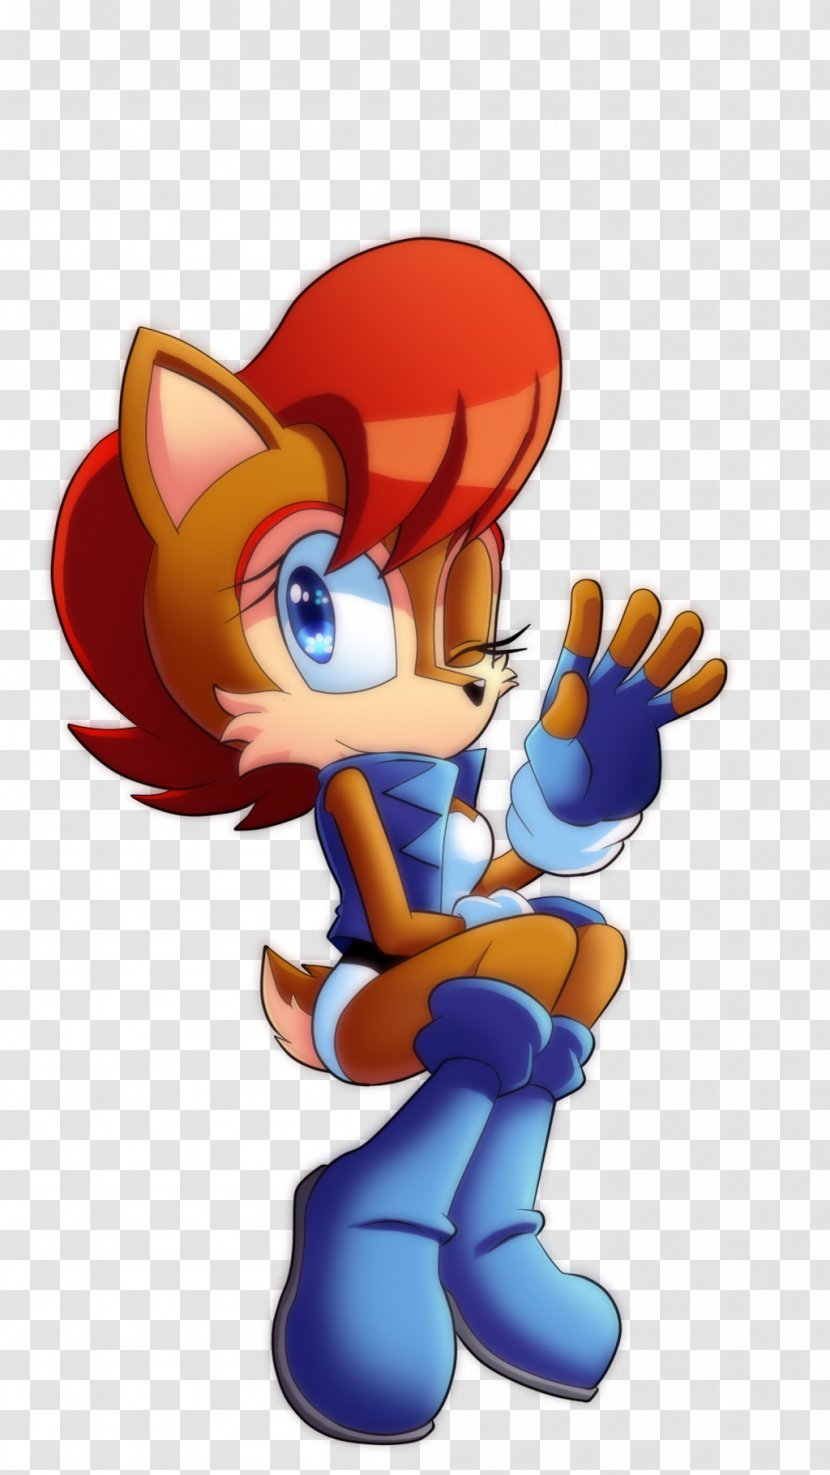 Sonic The Hedgehog Unleashed Princess Sally Acorn Amy Rose - Mascot Transparent PNG